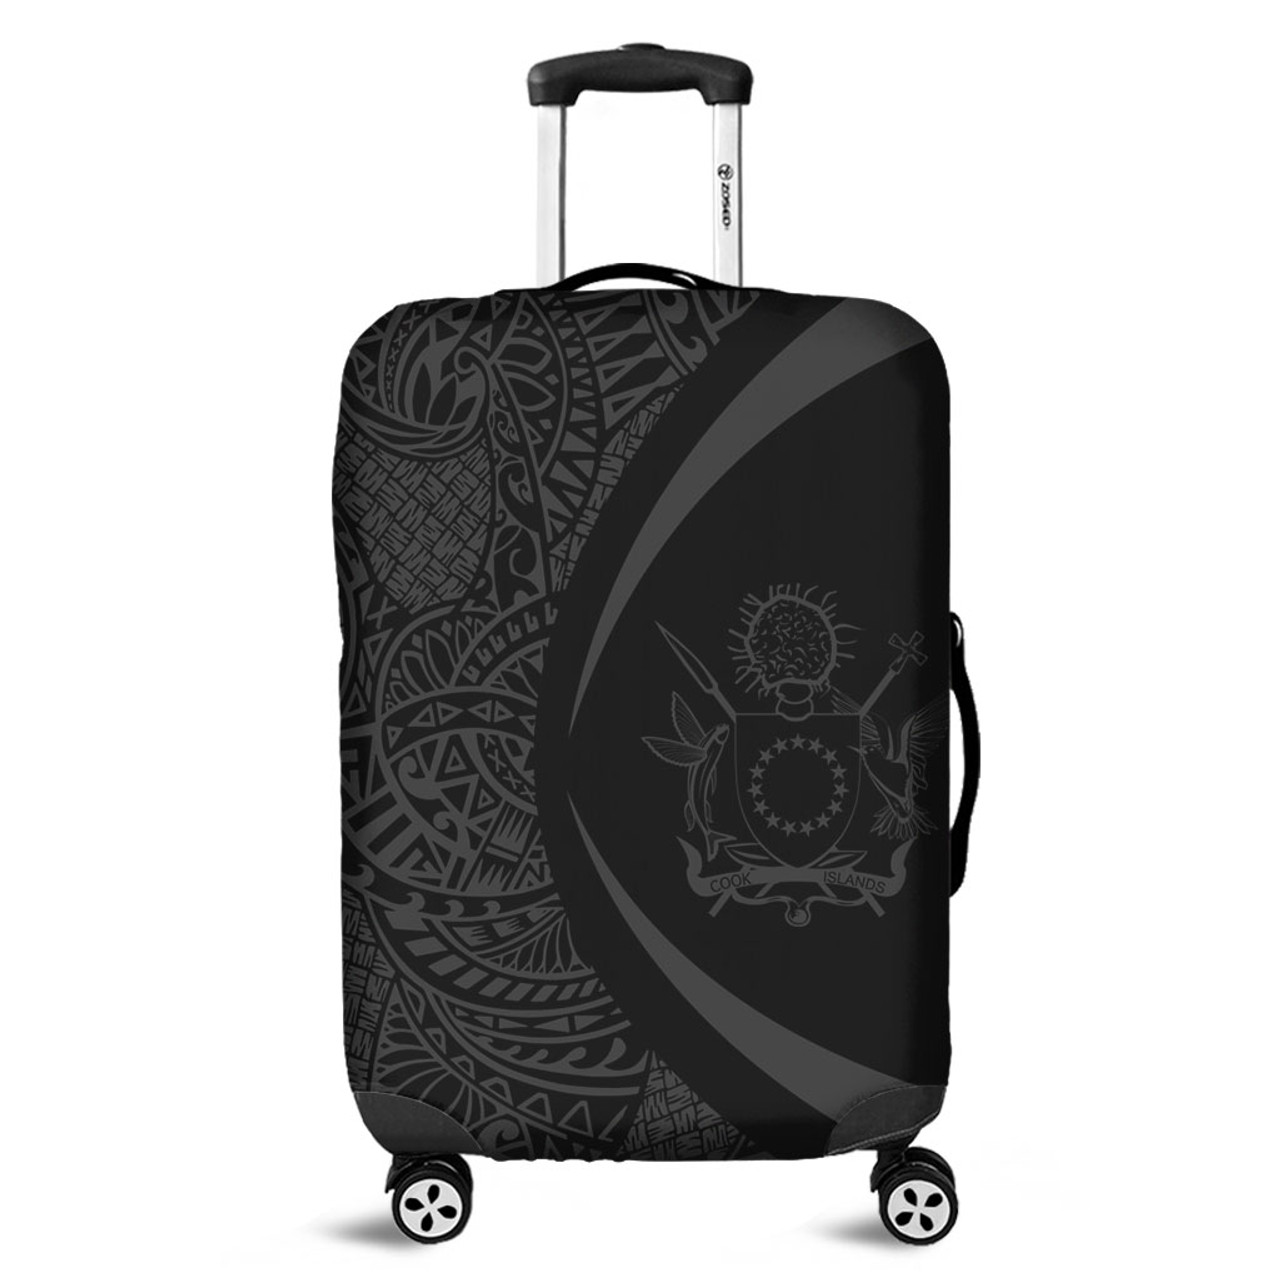 Cook Islands Luggage Cover Lauhala Gray Circle Style